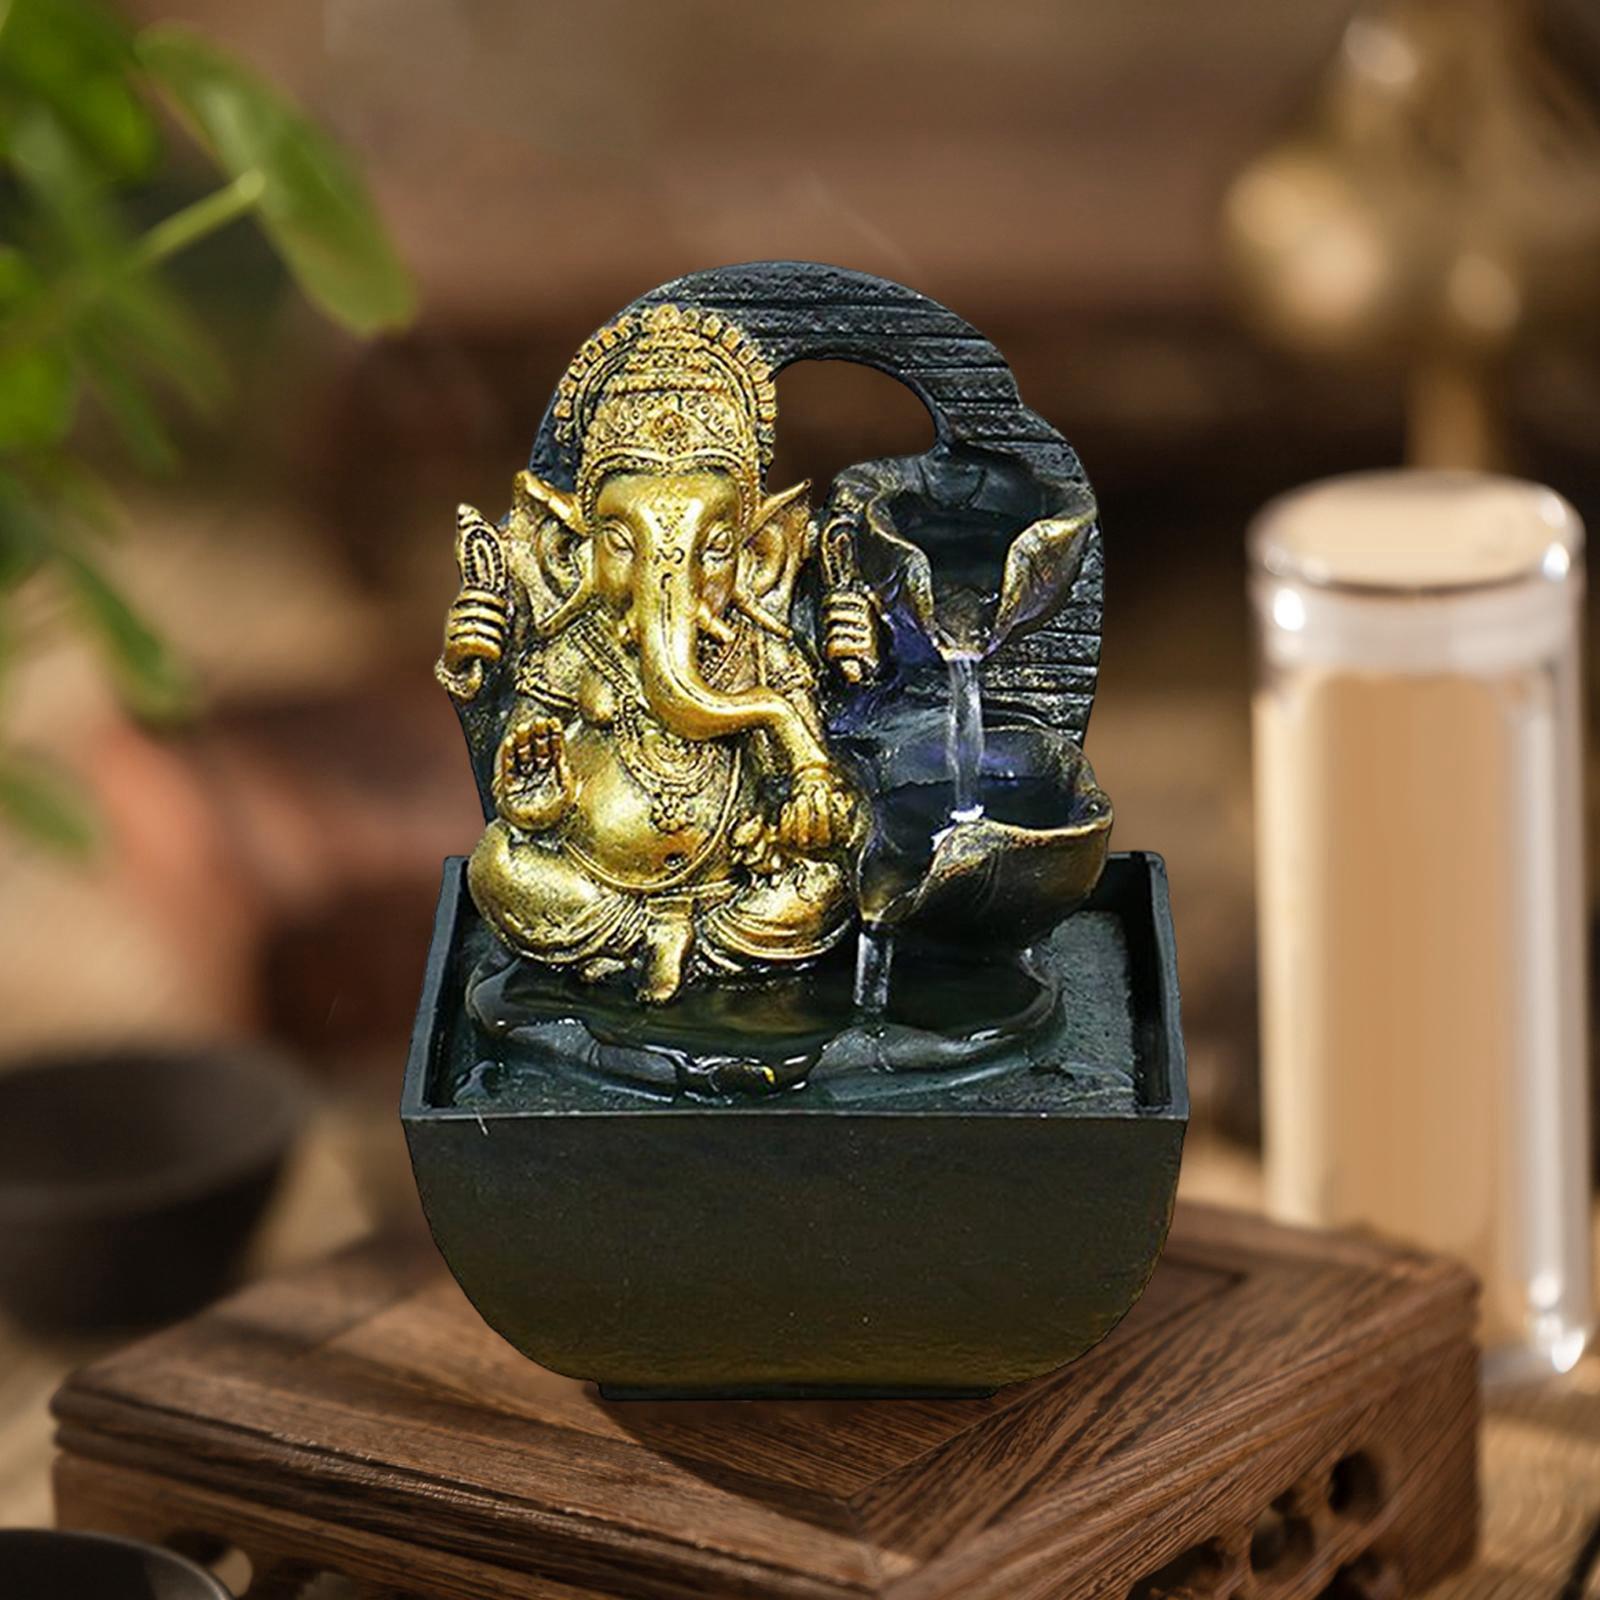 Ganesha Statues Tabletop Water Fountain Collectibles Resin Rockery Waterfall Style A 14x13.5x18cm